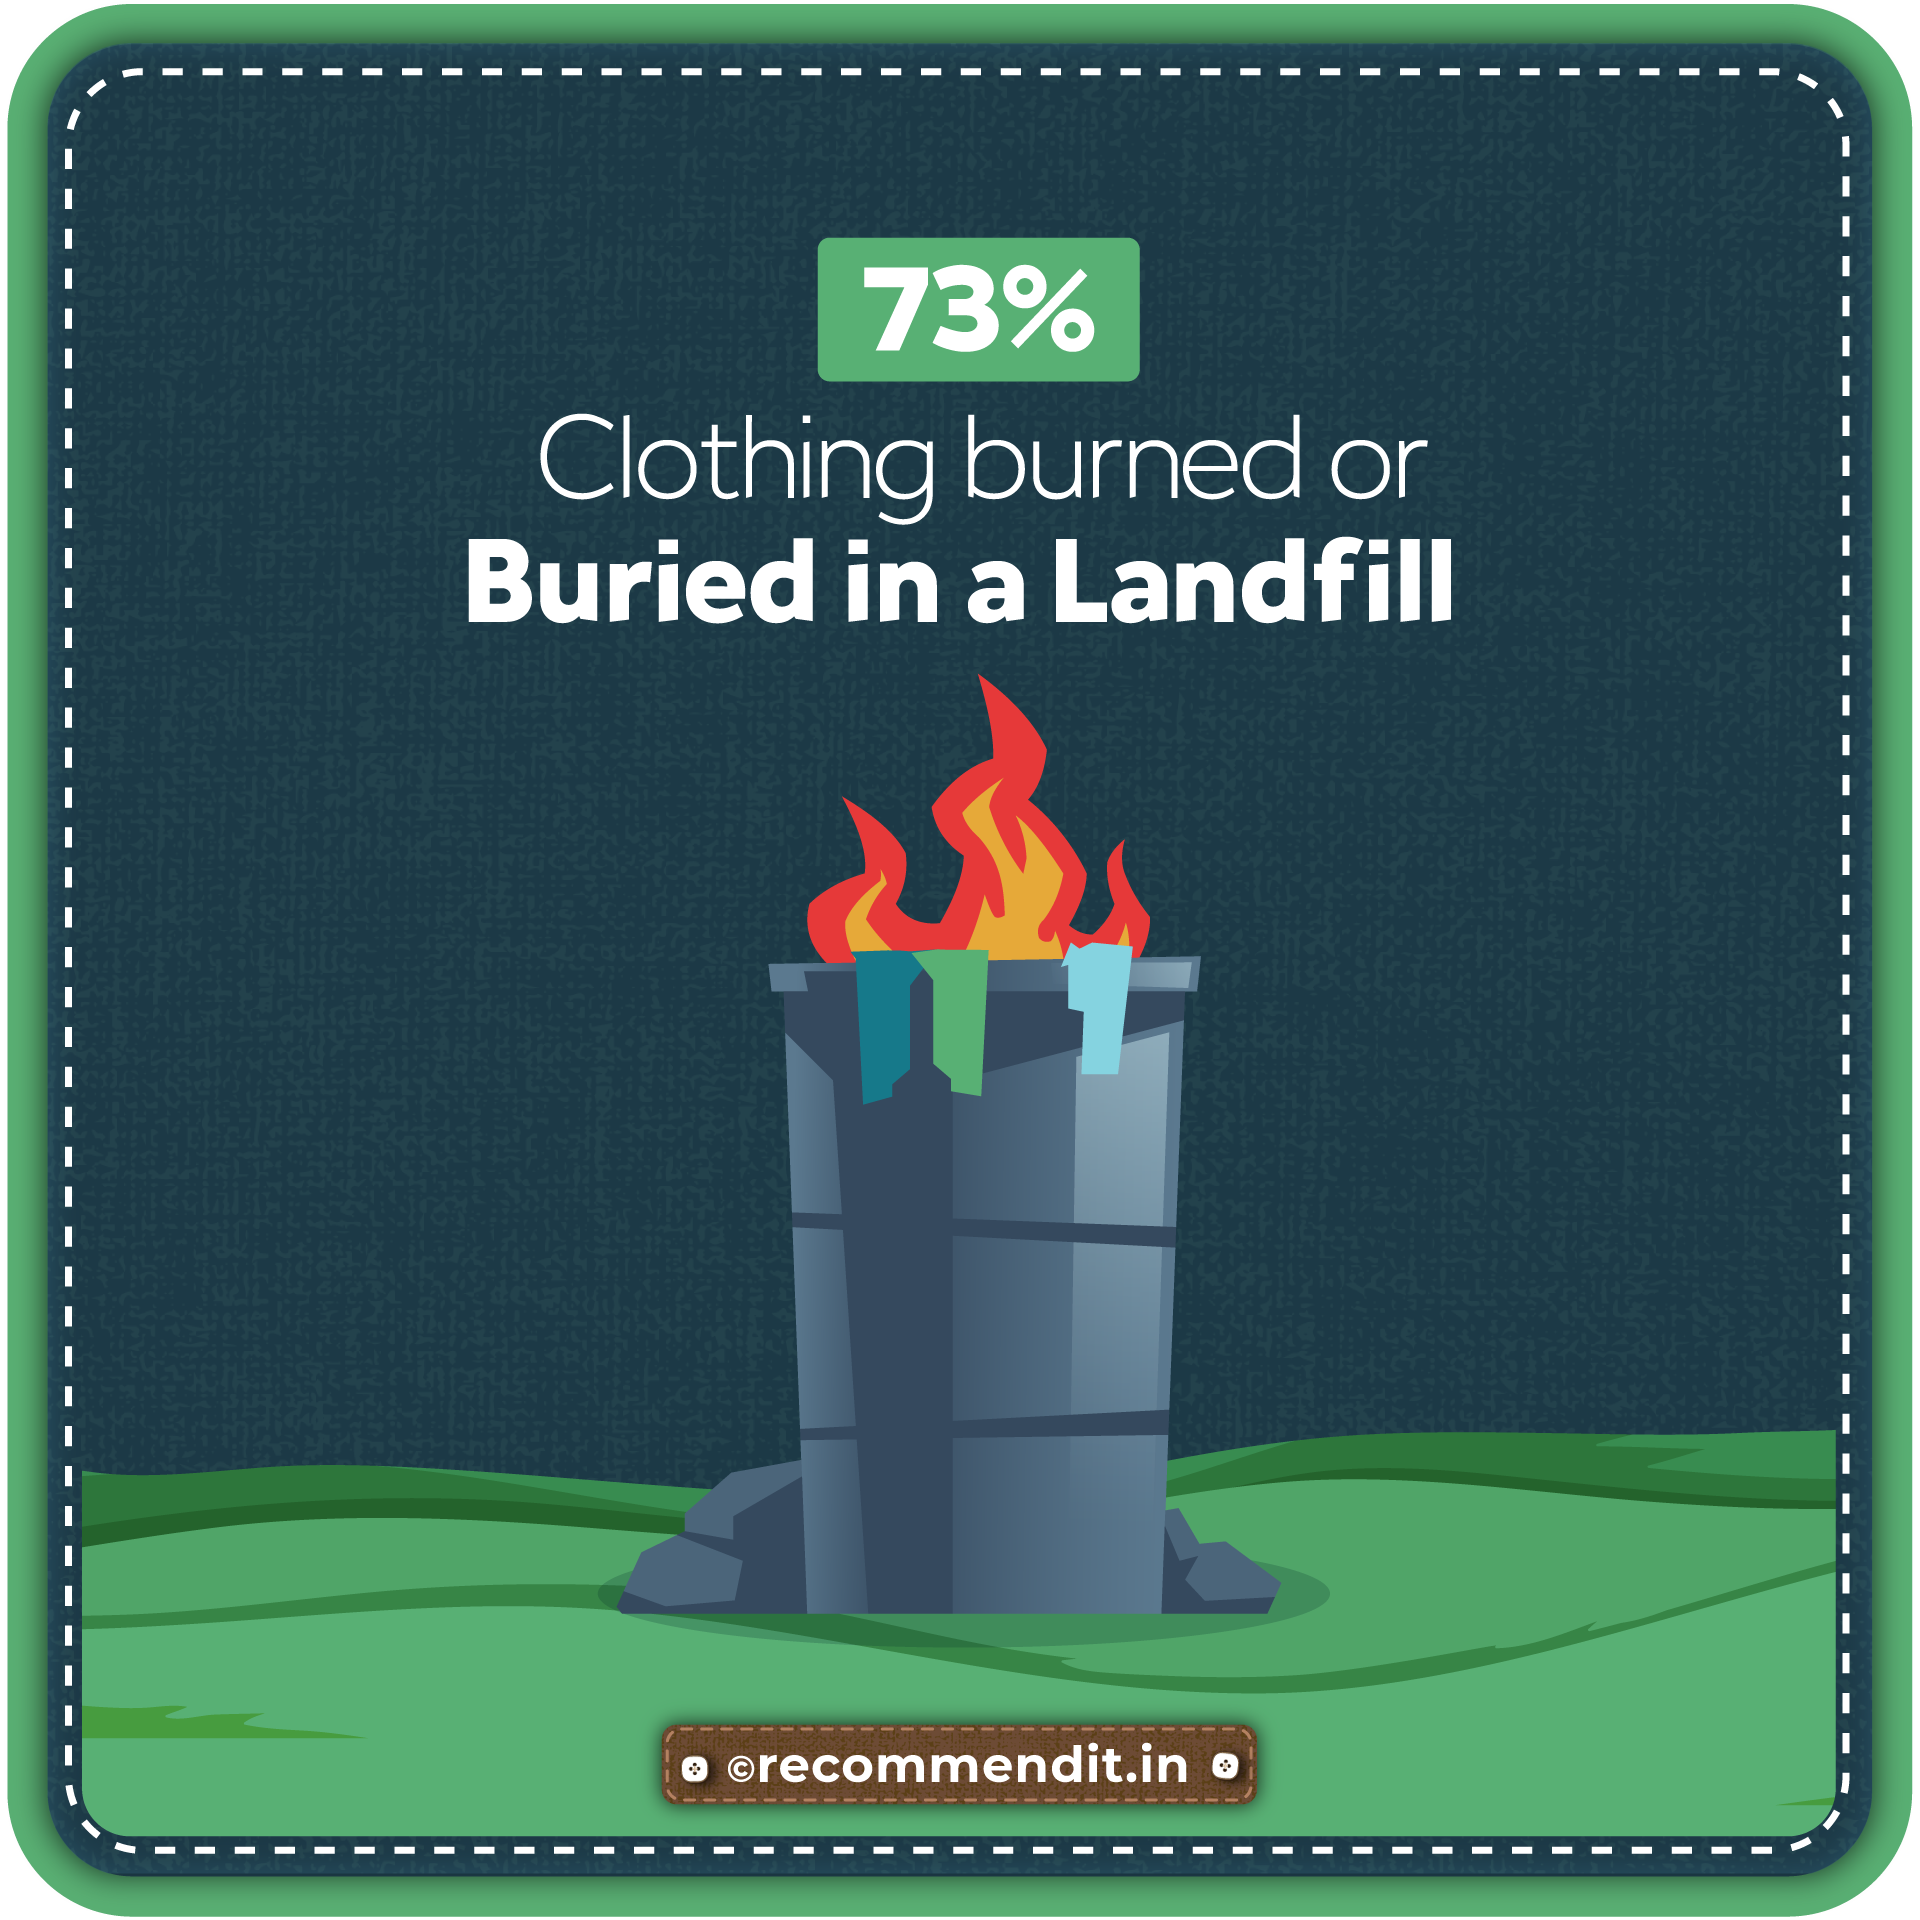 Clothing burned or buried in a landfill